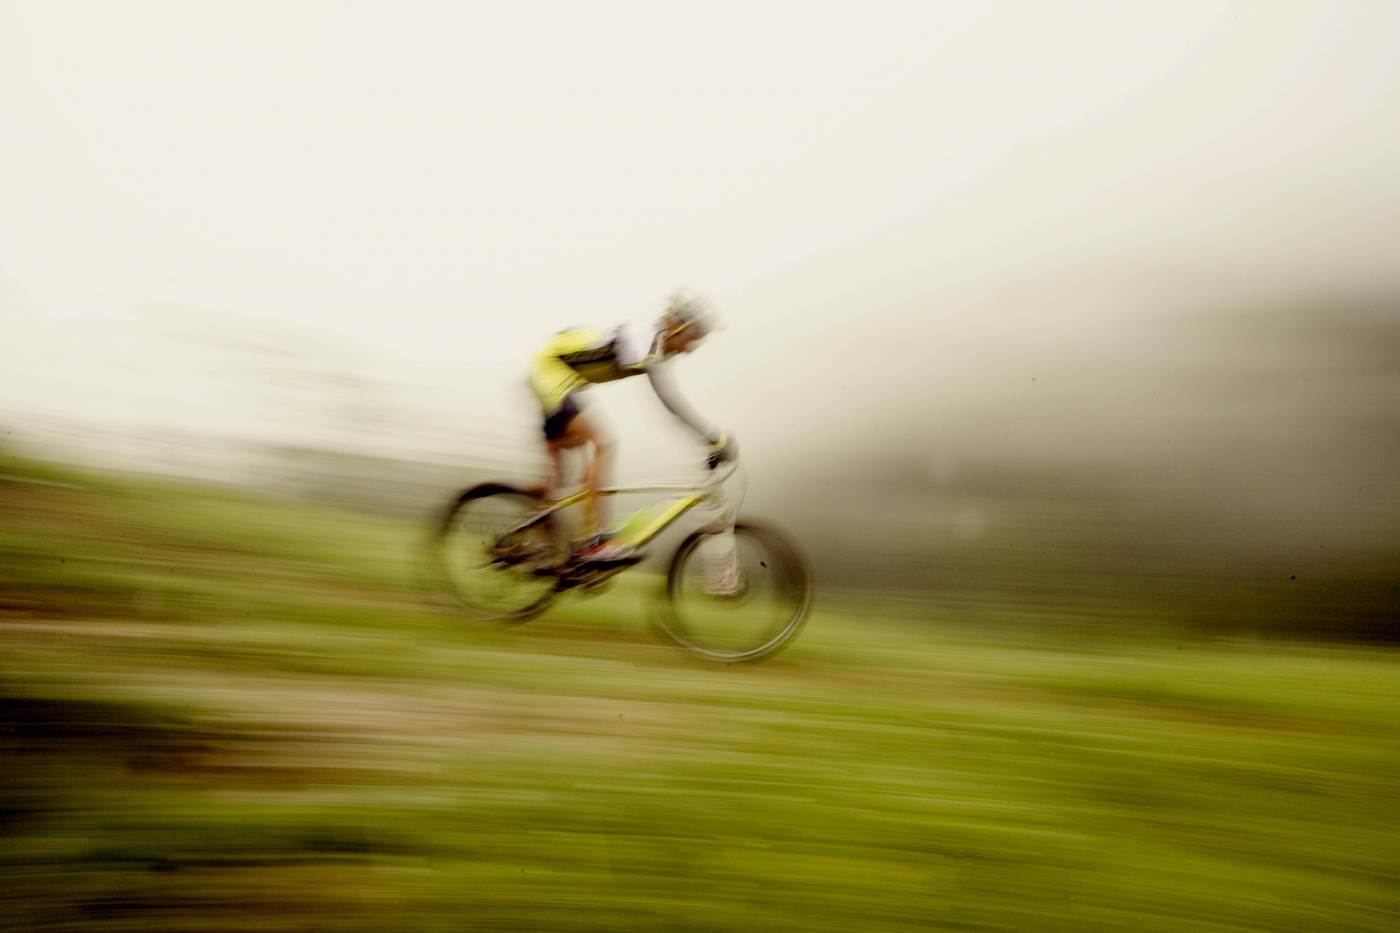 mountainbike downhill contest/ picture